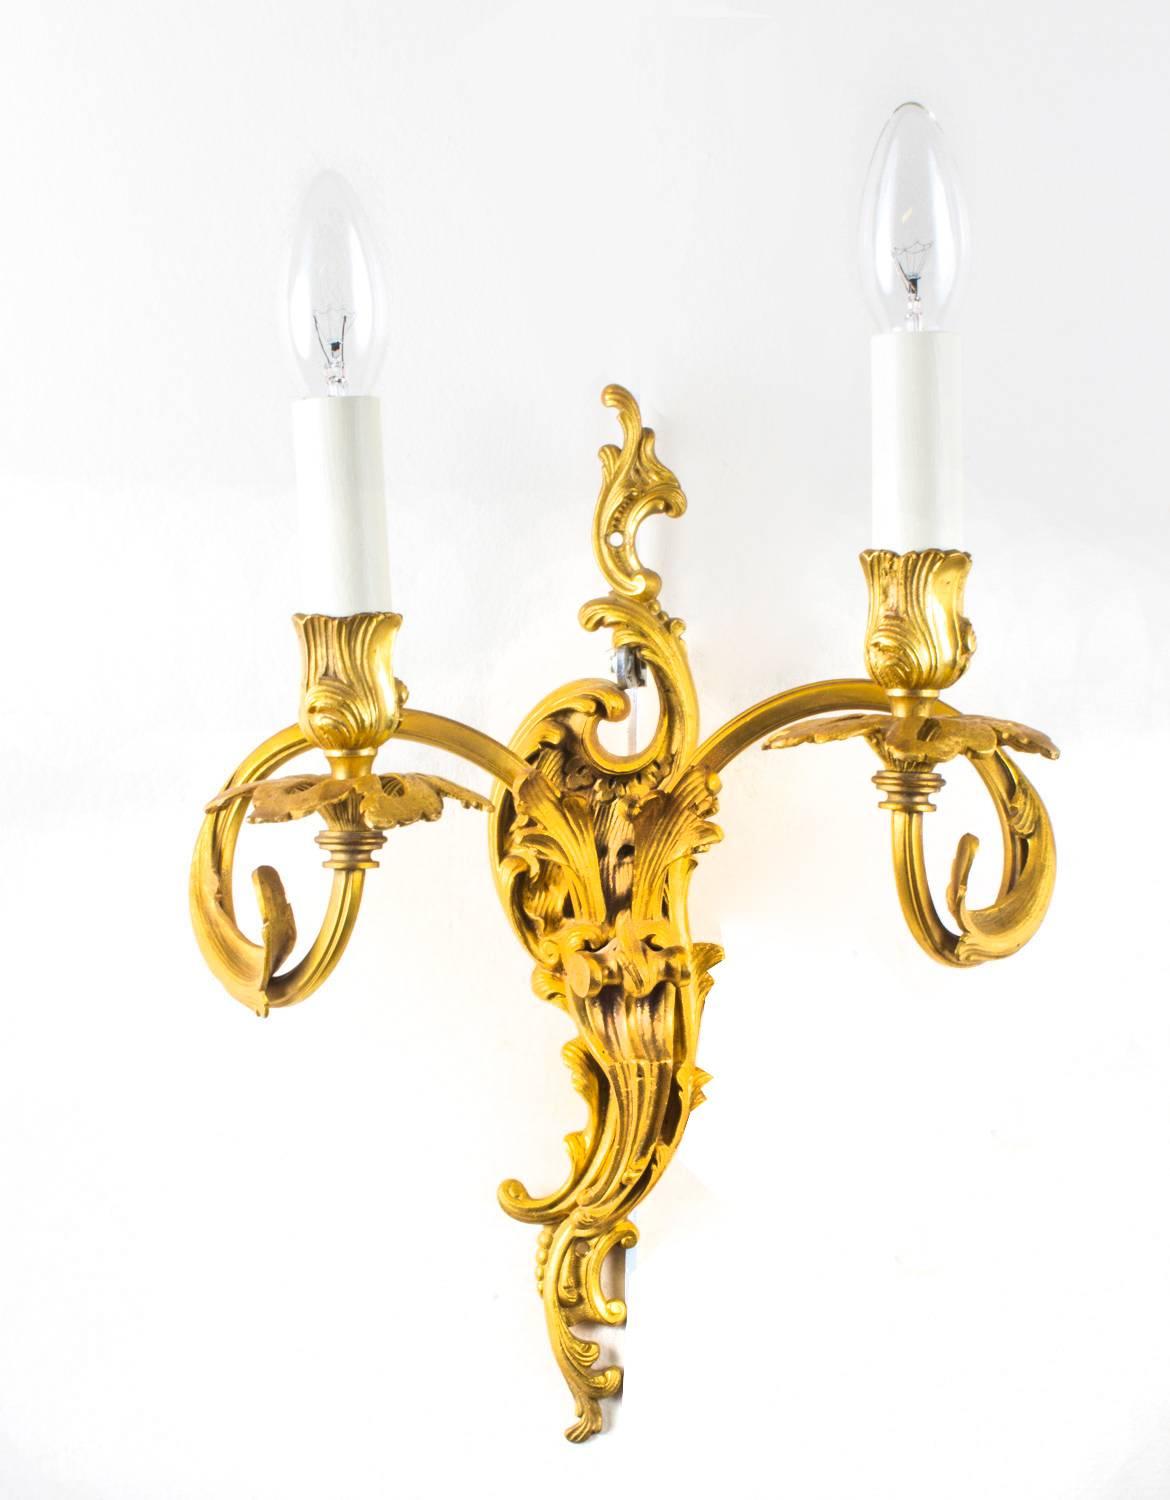 This is a stunning set of four French Rococo twin branch ormolu wall lights, circa 1920.

Purchased from a fabulous apartment in Hampstead, London and there is no mistaking their fabulous quality and design. They will soon instantly enhance the